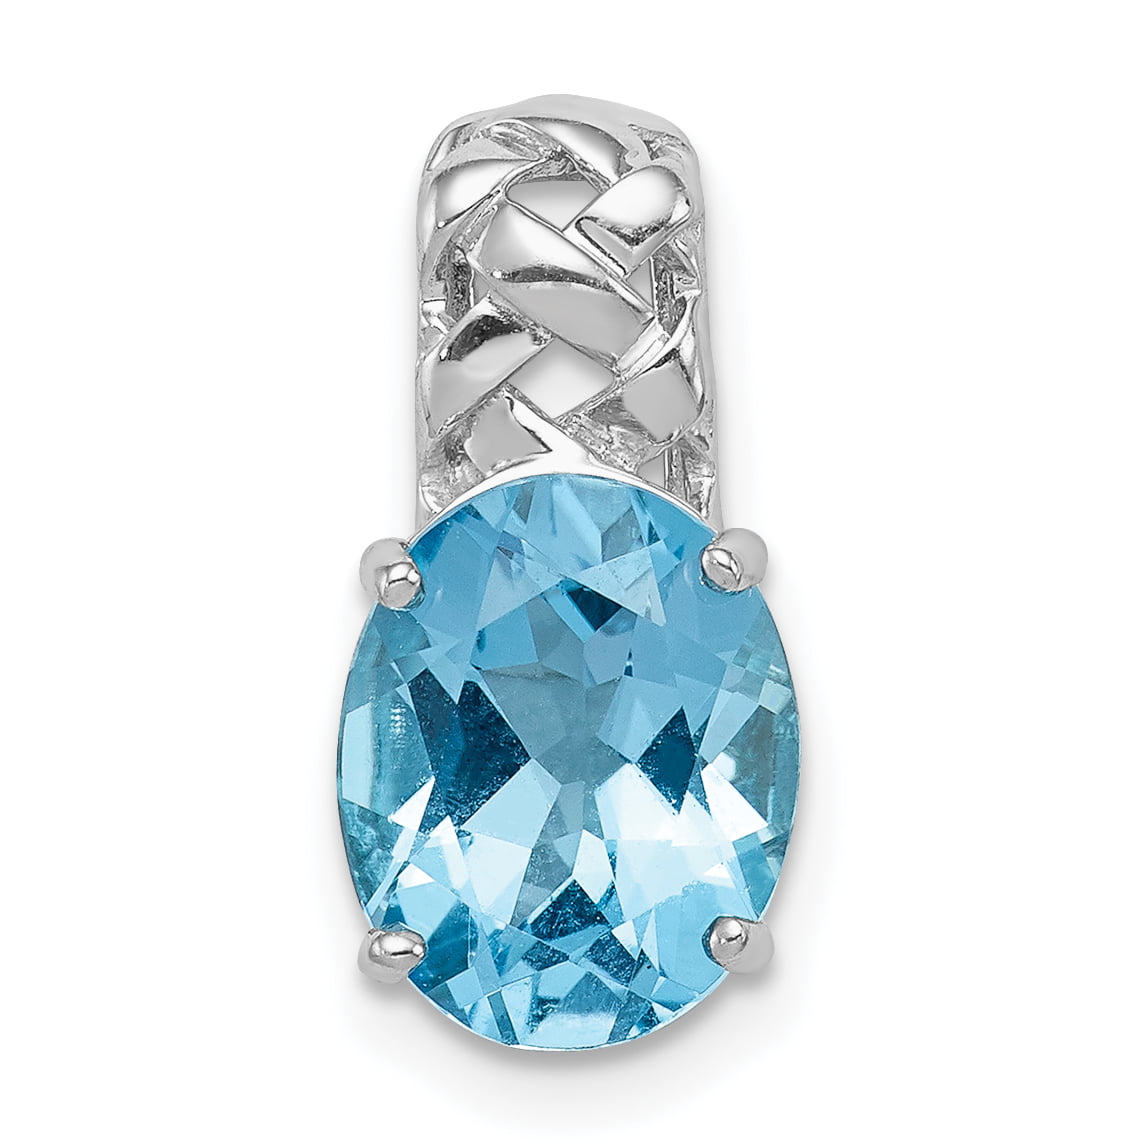 Sterling Silver Rhodium-plated Polished Blue Topaz Oval Pendant 